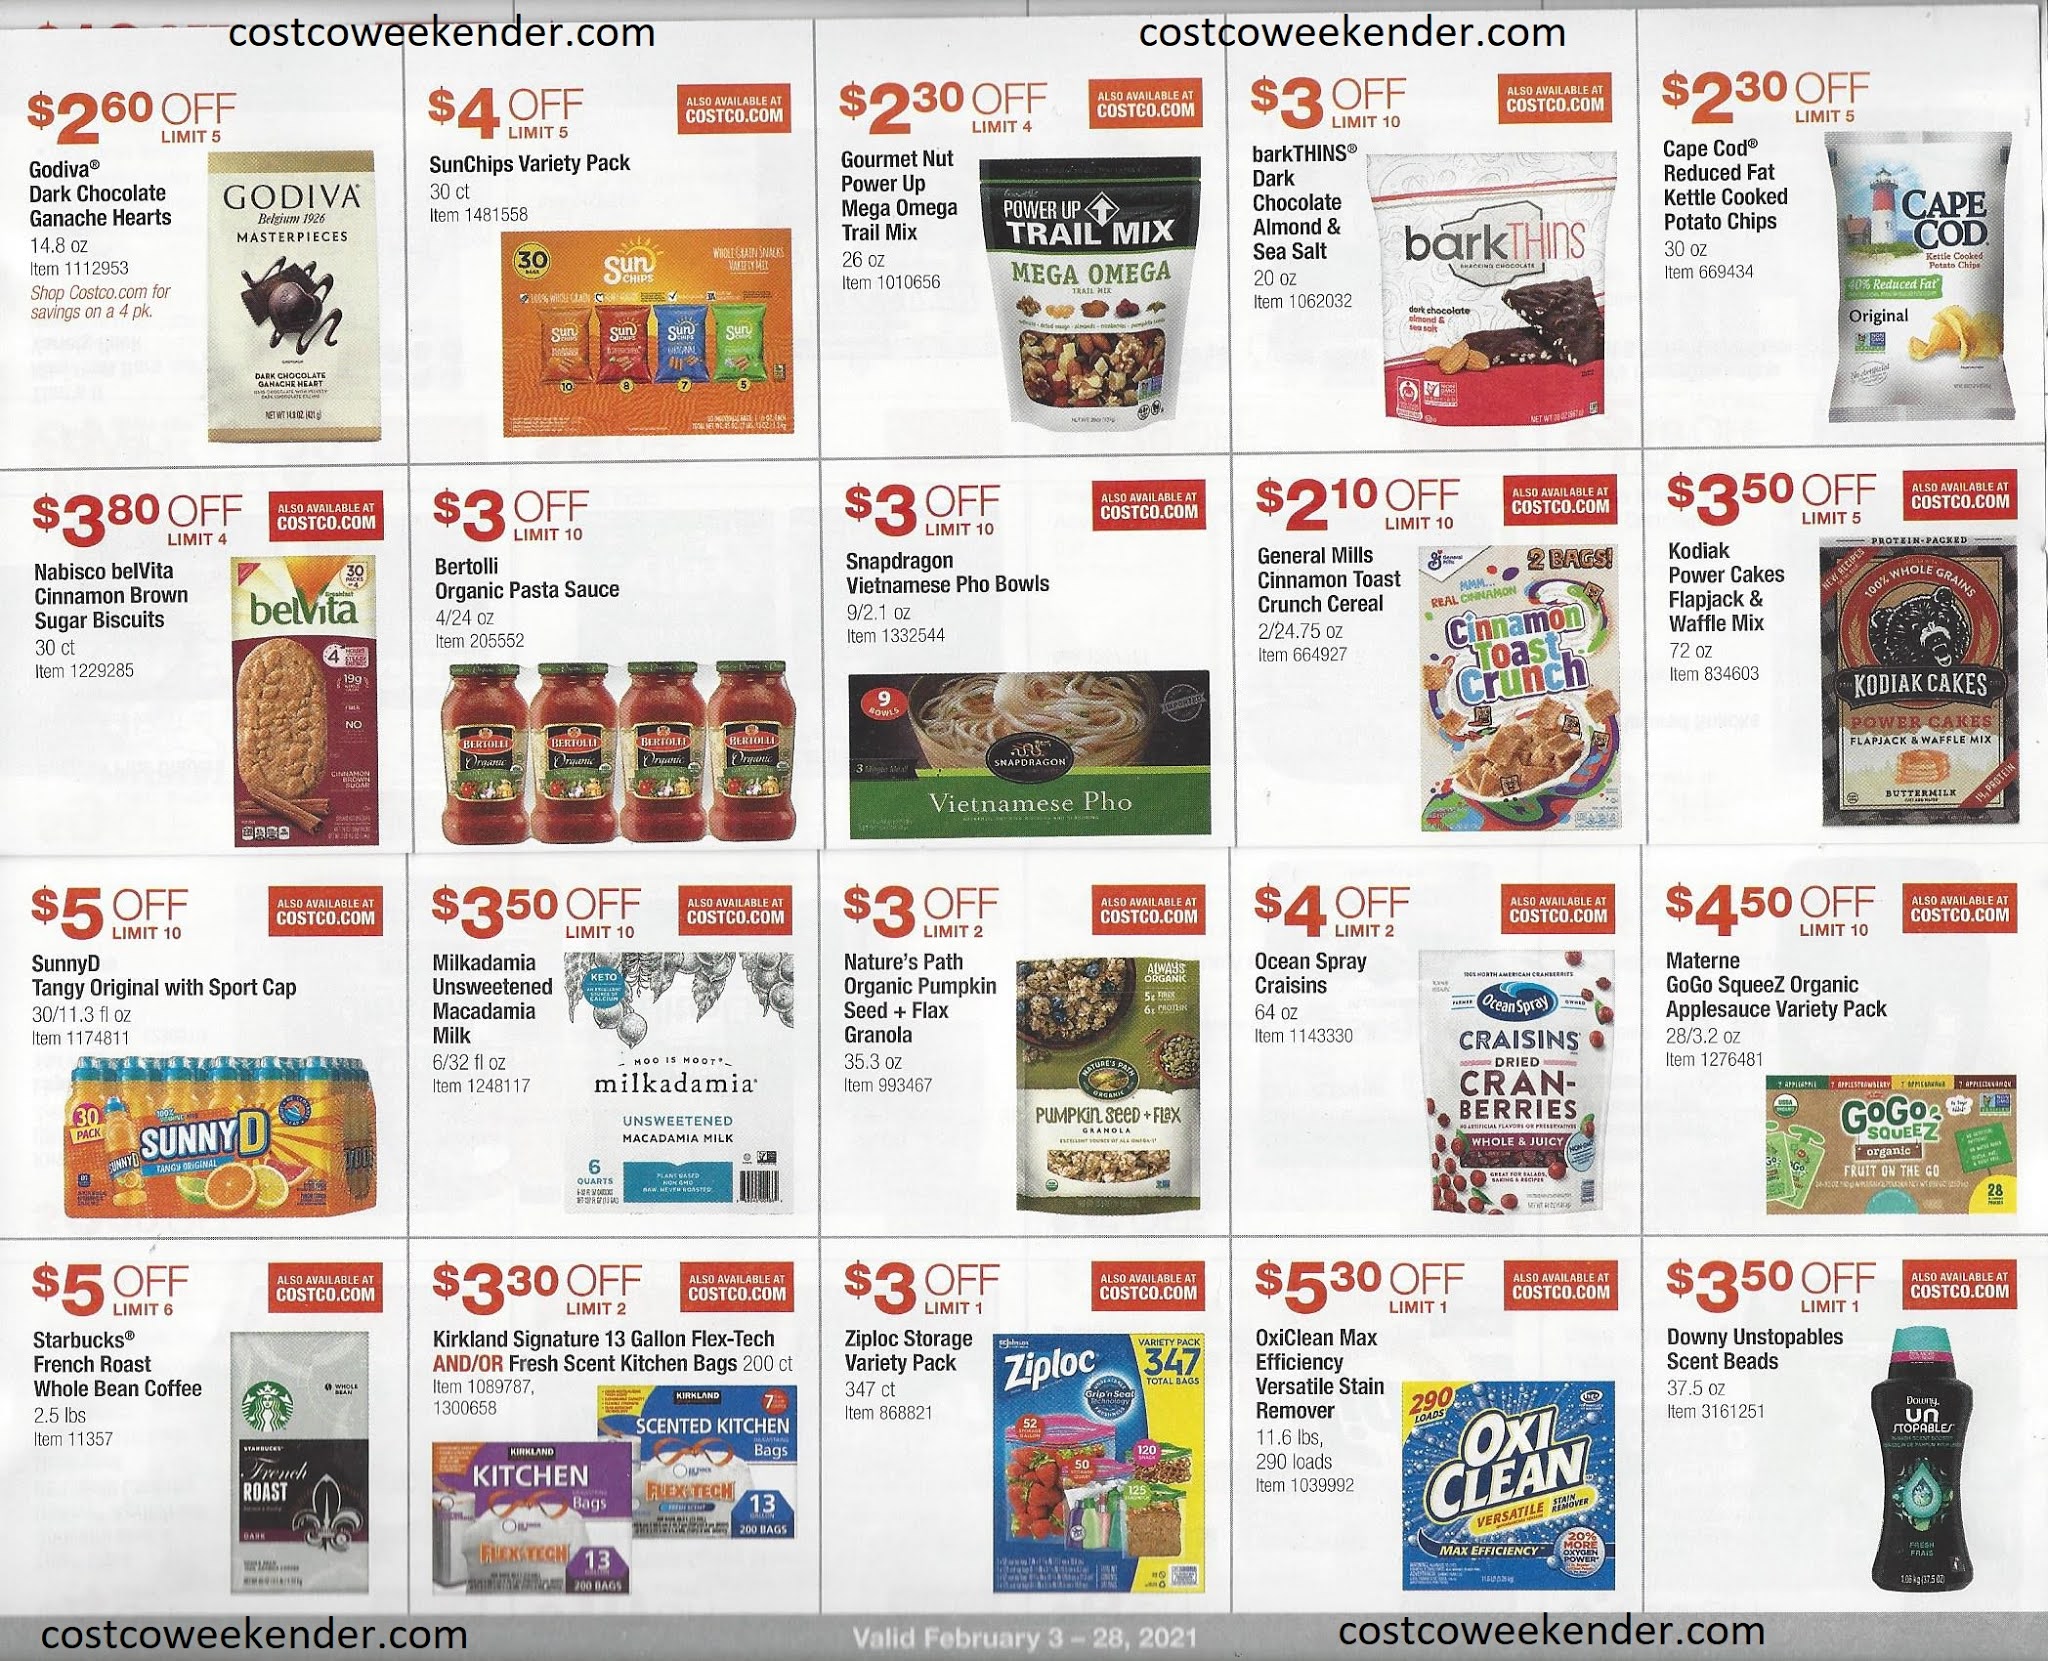 February 2021 Costco Coupon Book Costco Weekender